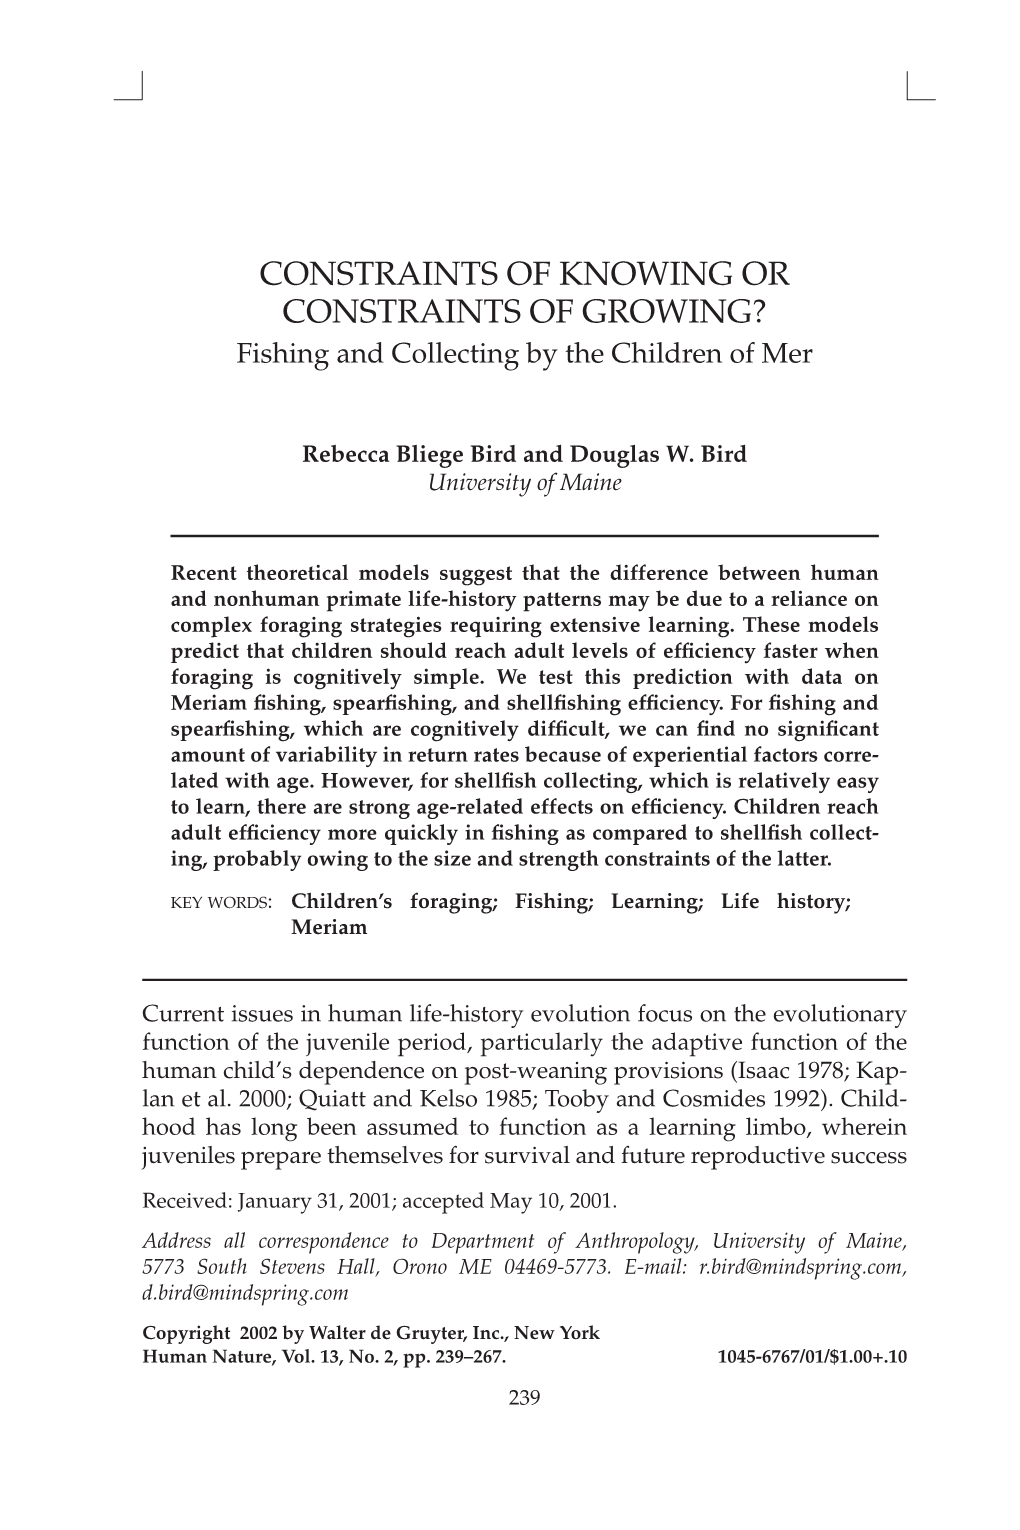 CONSTRAINTS of KNOWING OR CONSTRAINTS of GROWING? Fishing and Collecting by the Children of Mer